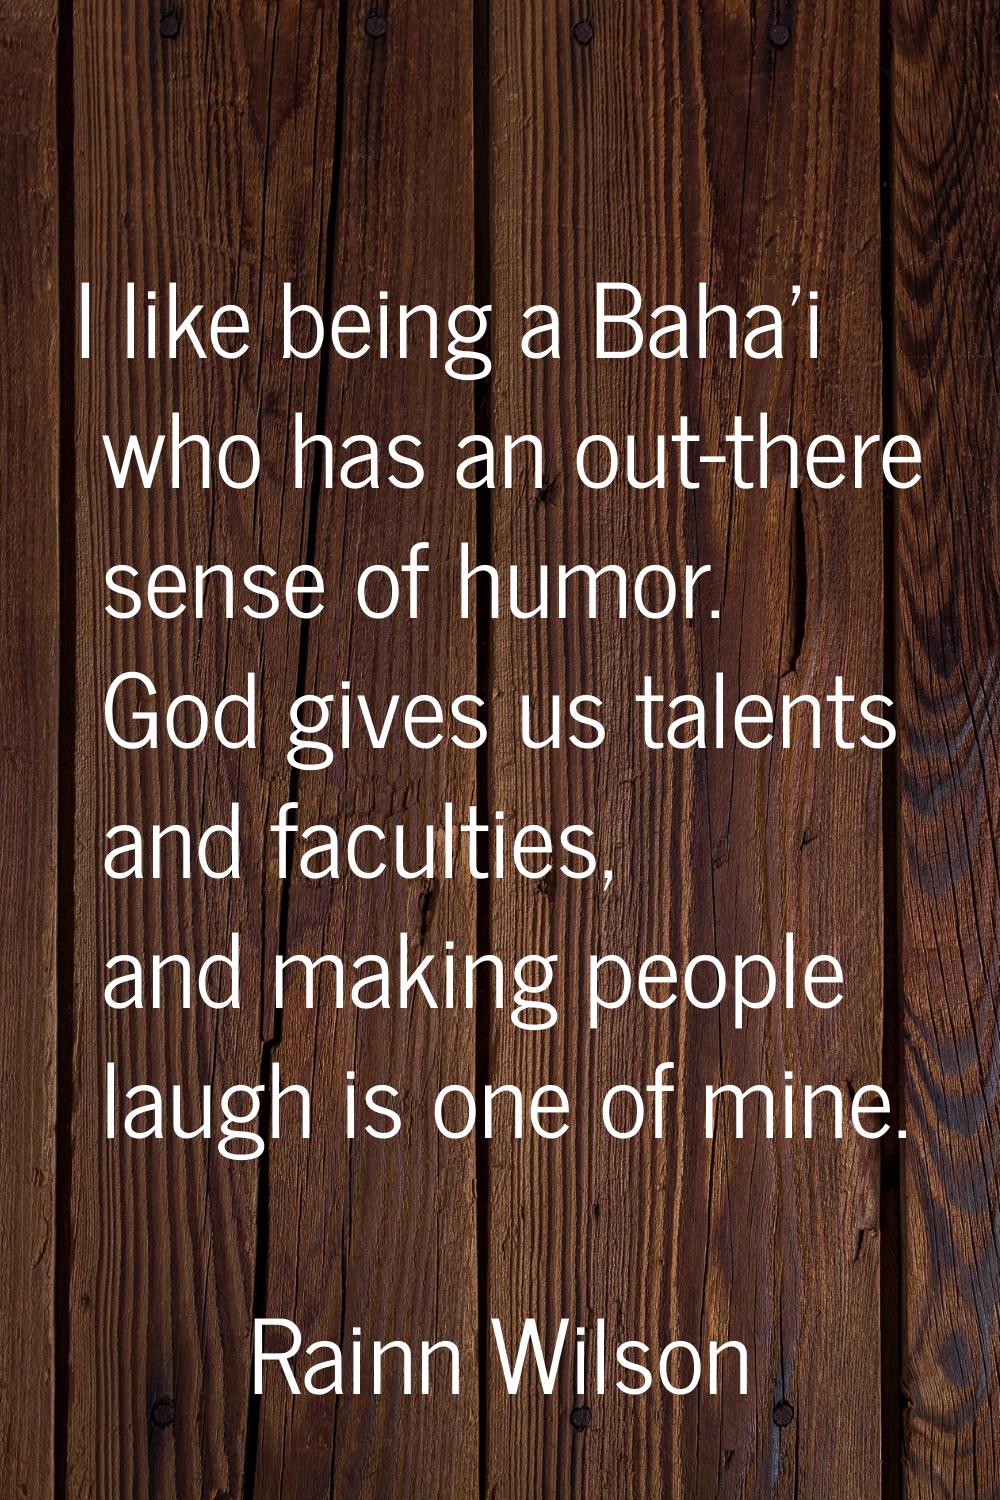 I like being a Baha'i who has an out-there sense of humor. God gives us talents and faculties, and 